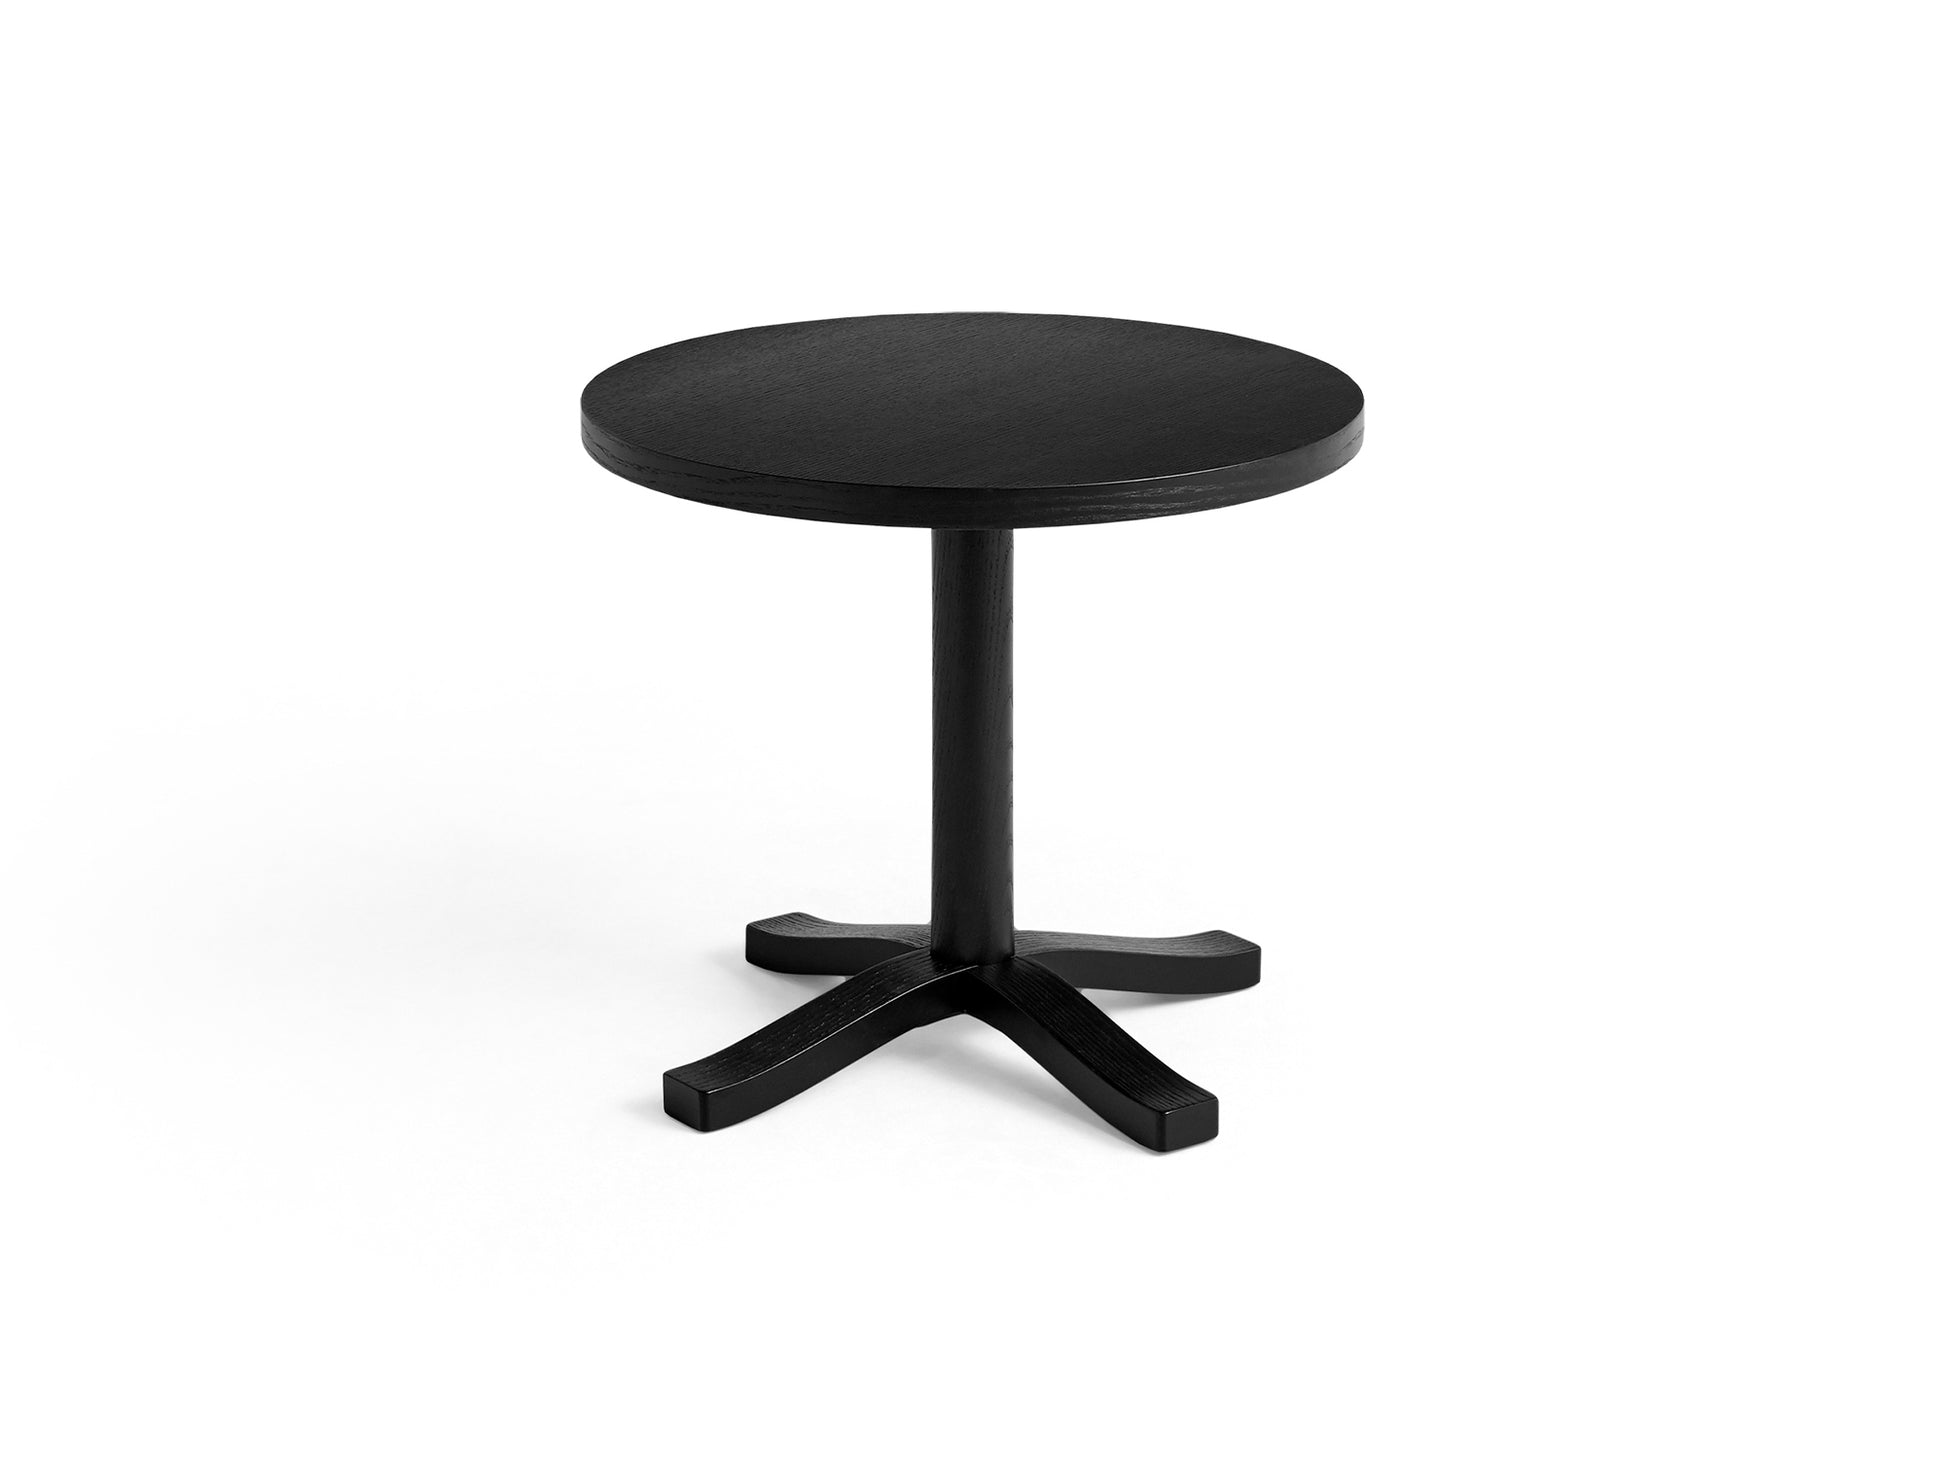 Pastis Table by HAY - Diameter 46 x Height 40 cm /  Black Water-Based Lacquered Ash